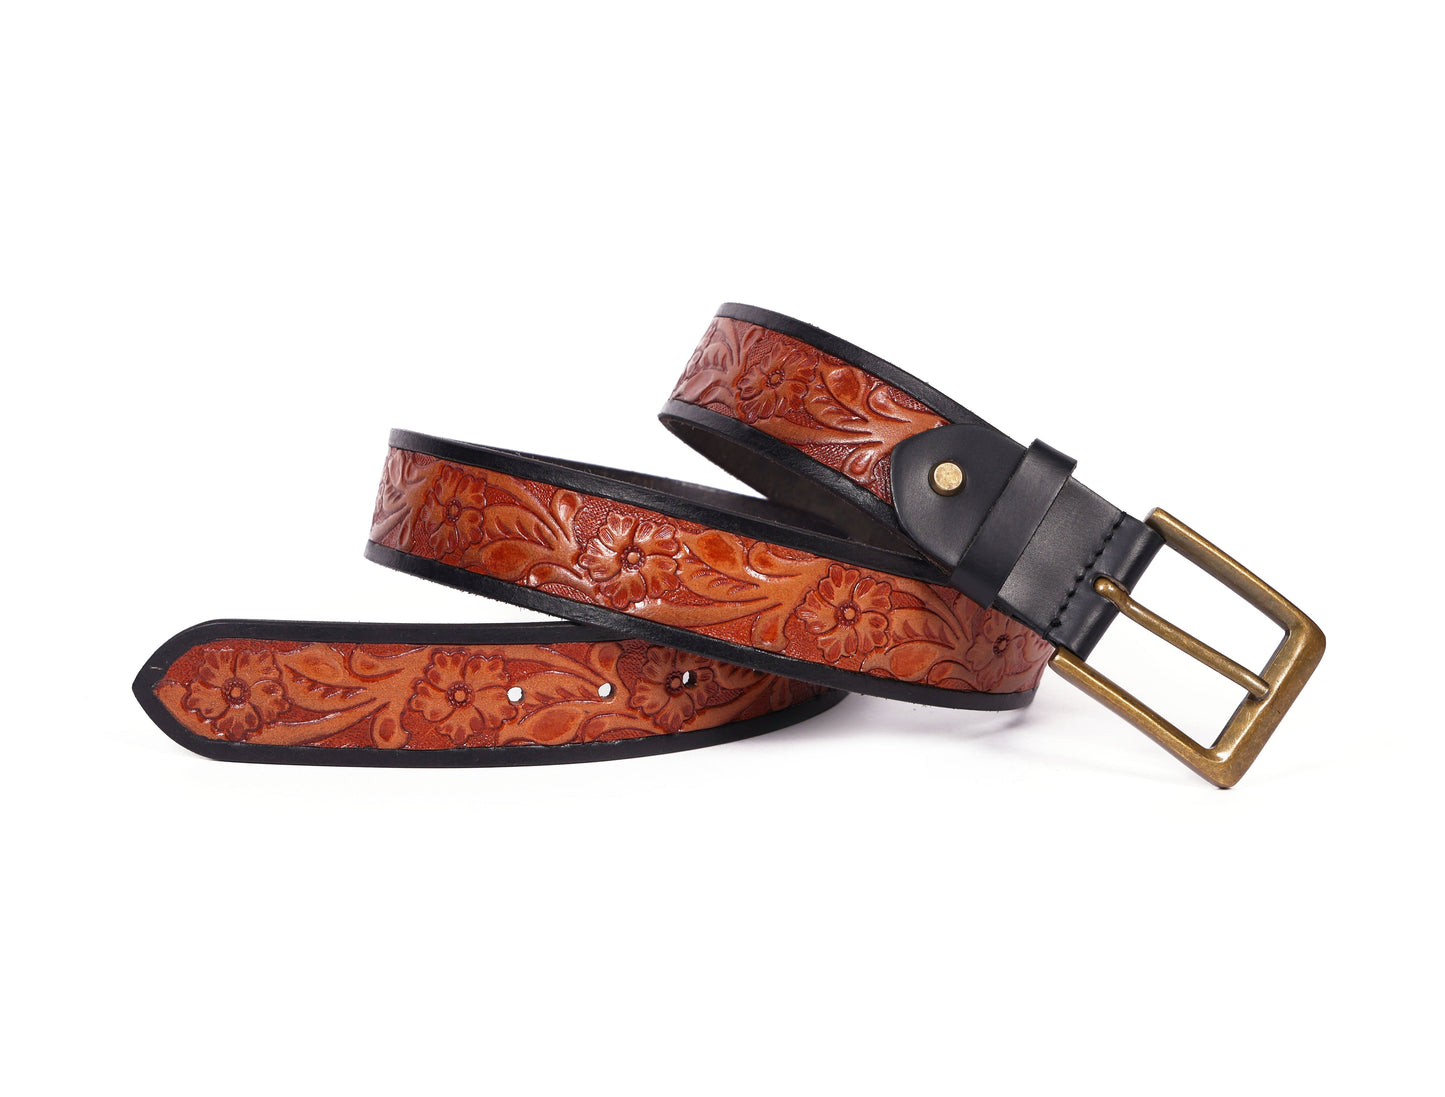 Premium Hand-Made Brown and Black Tooling Belt with Brass Antique Buckle. - CELTICINDIA